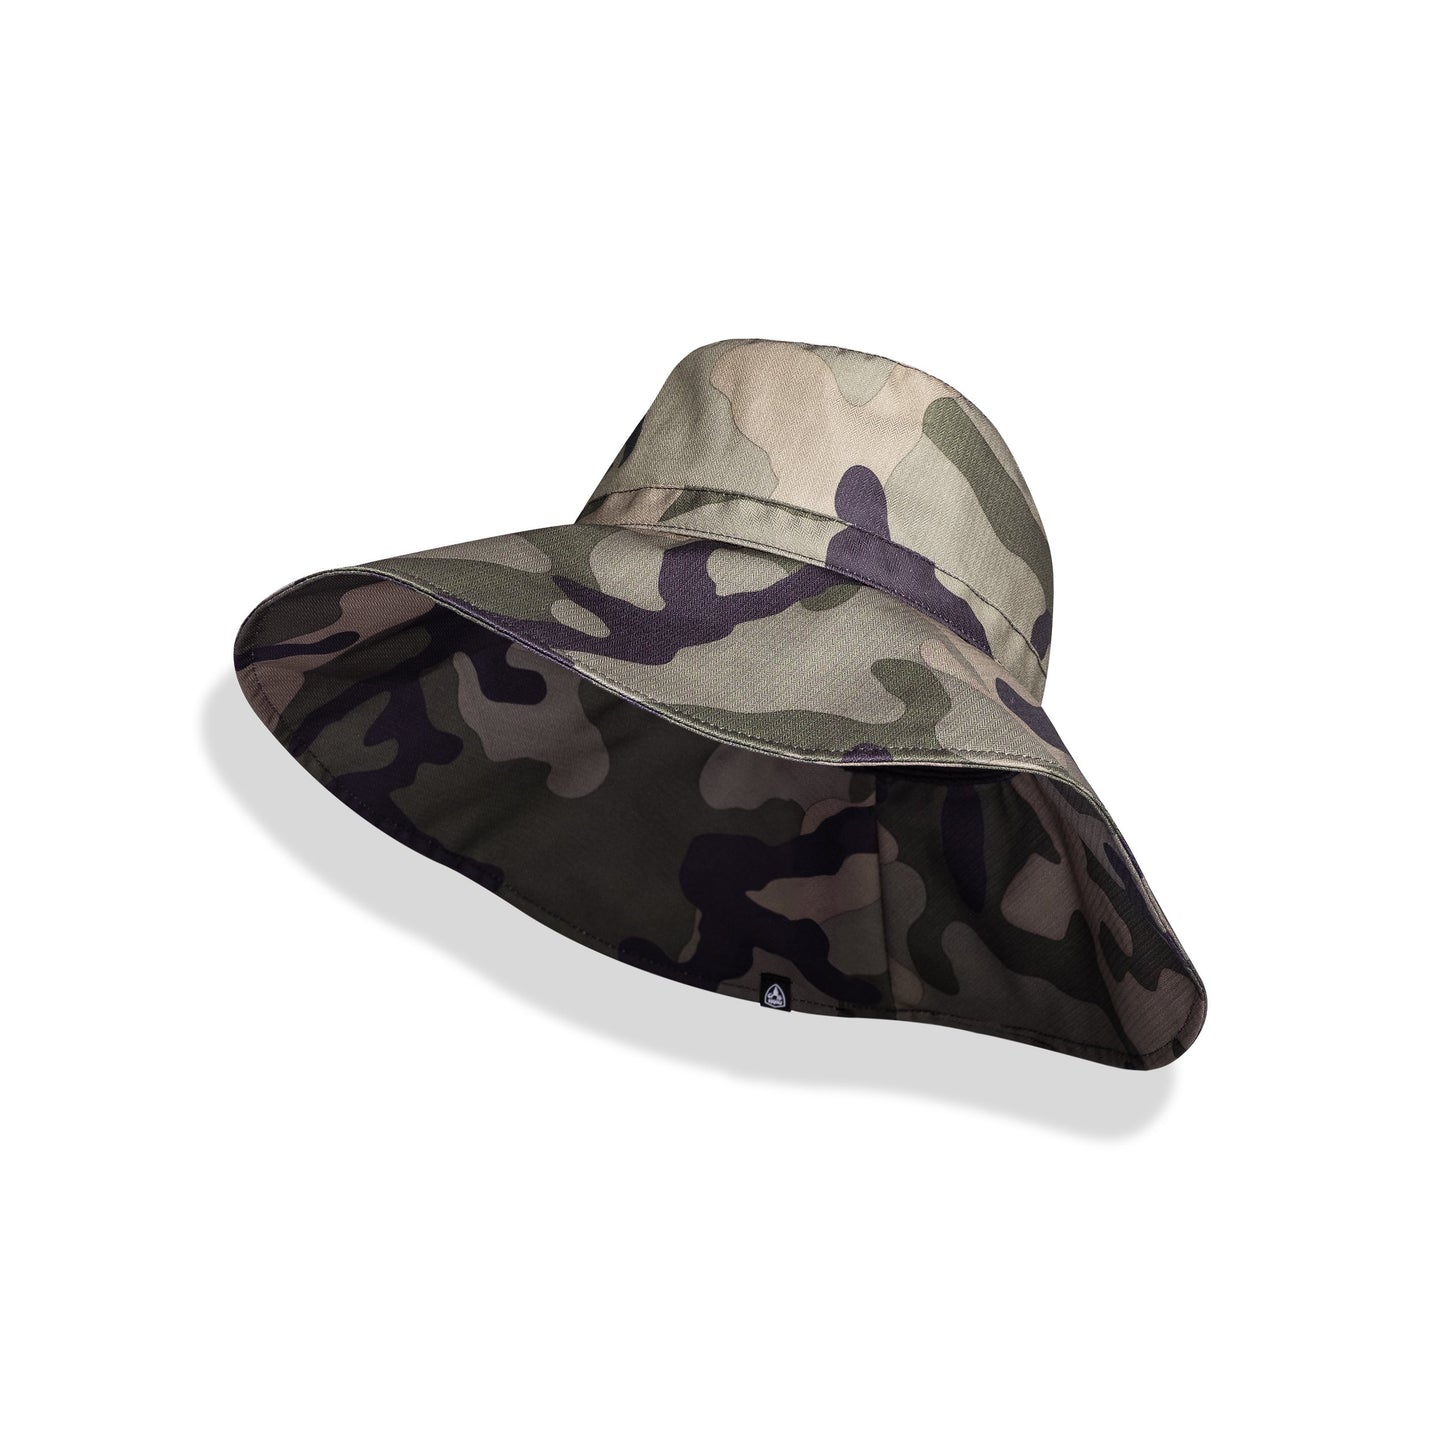 Sunhat treated with a durable water repellent finish and a subtle herringbone in Camo texture on the surface in Camo